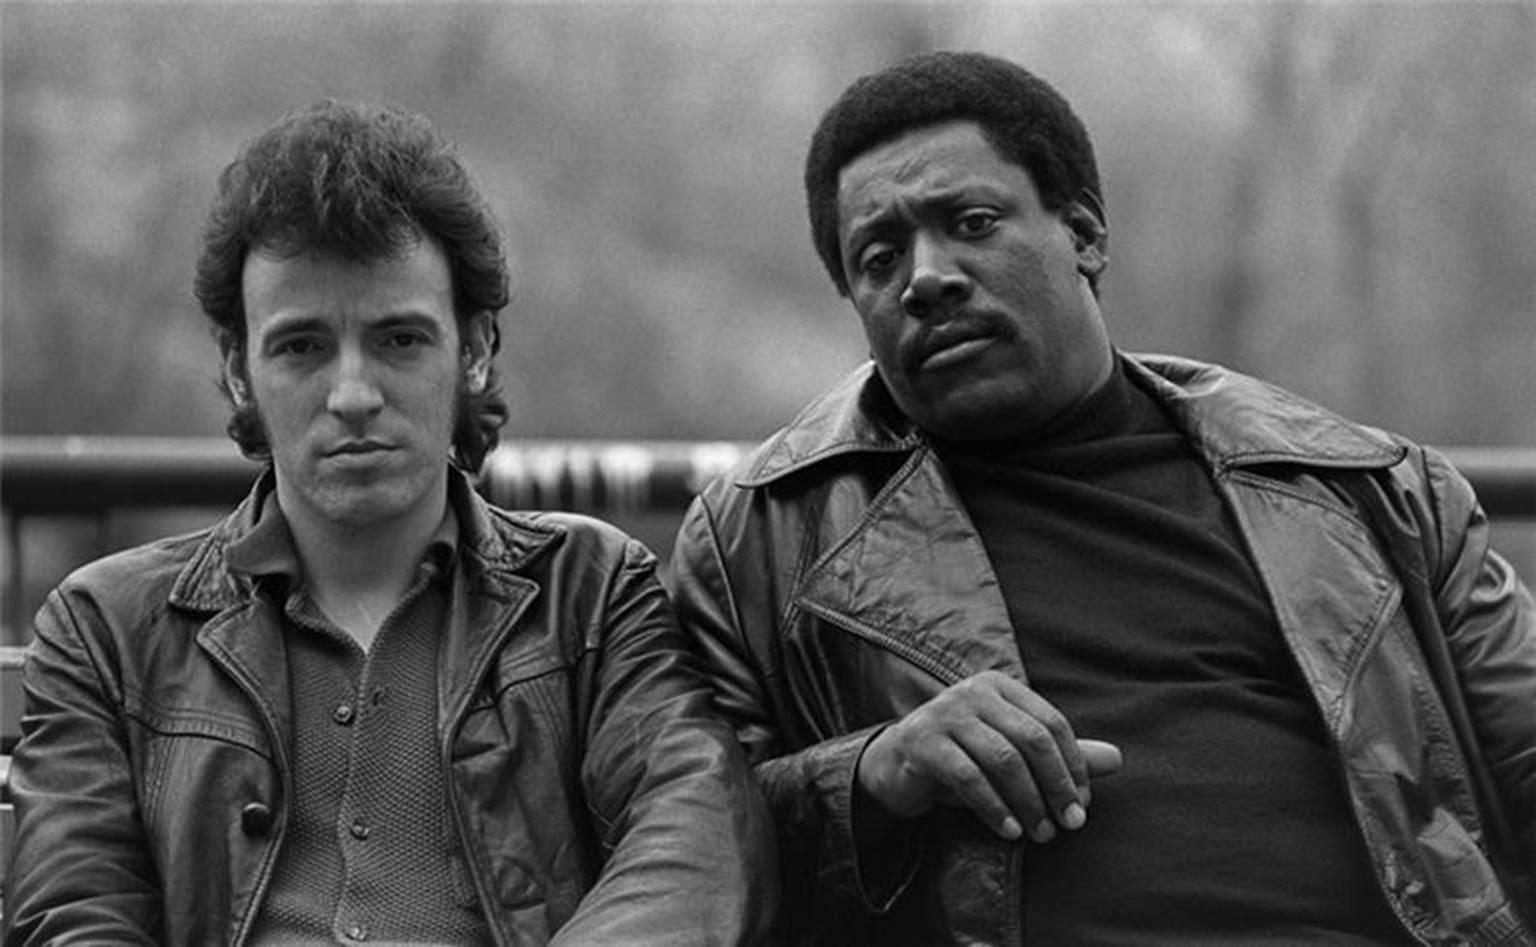 Joel Bernstein Black and White Photograph - Bruce Springsteen and Clarence Clemons, Central Park South, NYC 1980